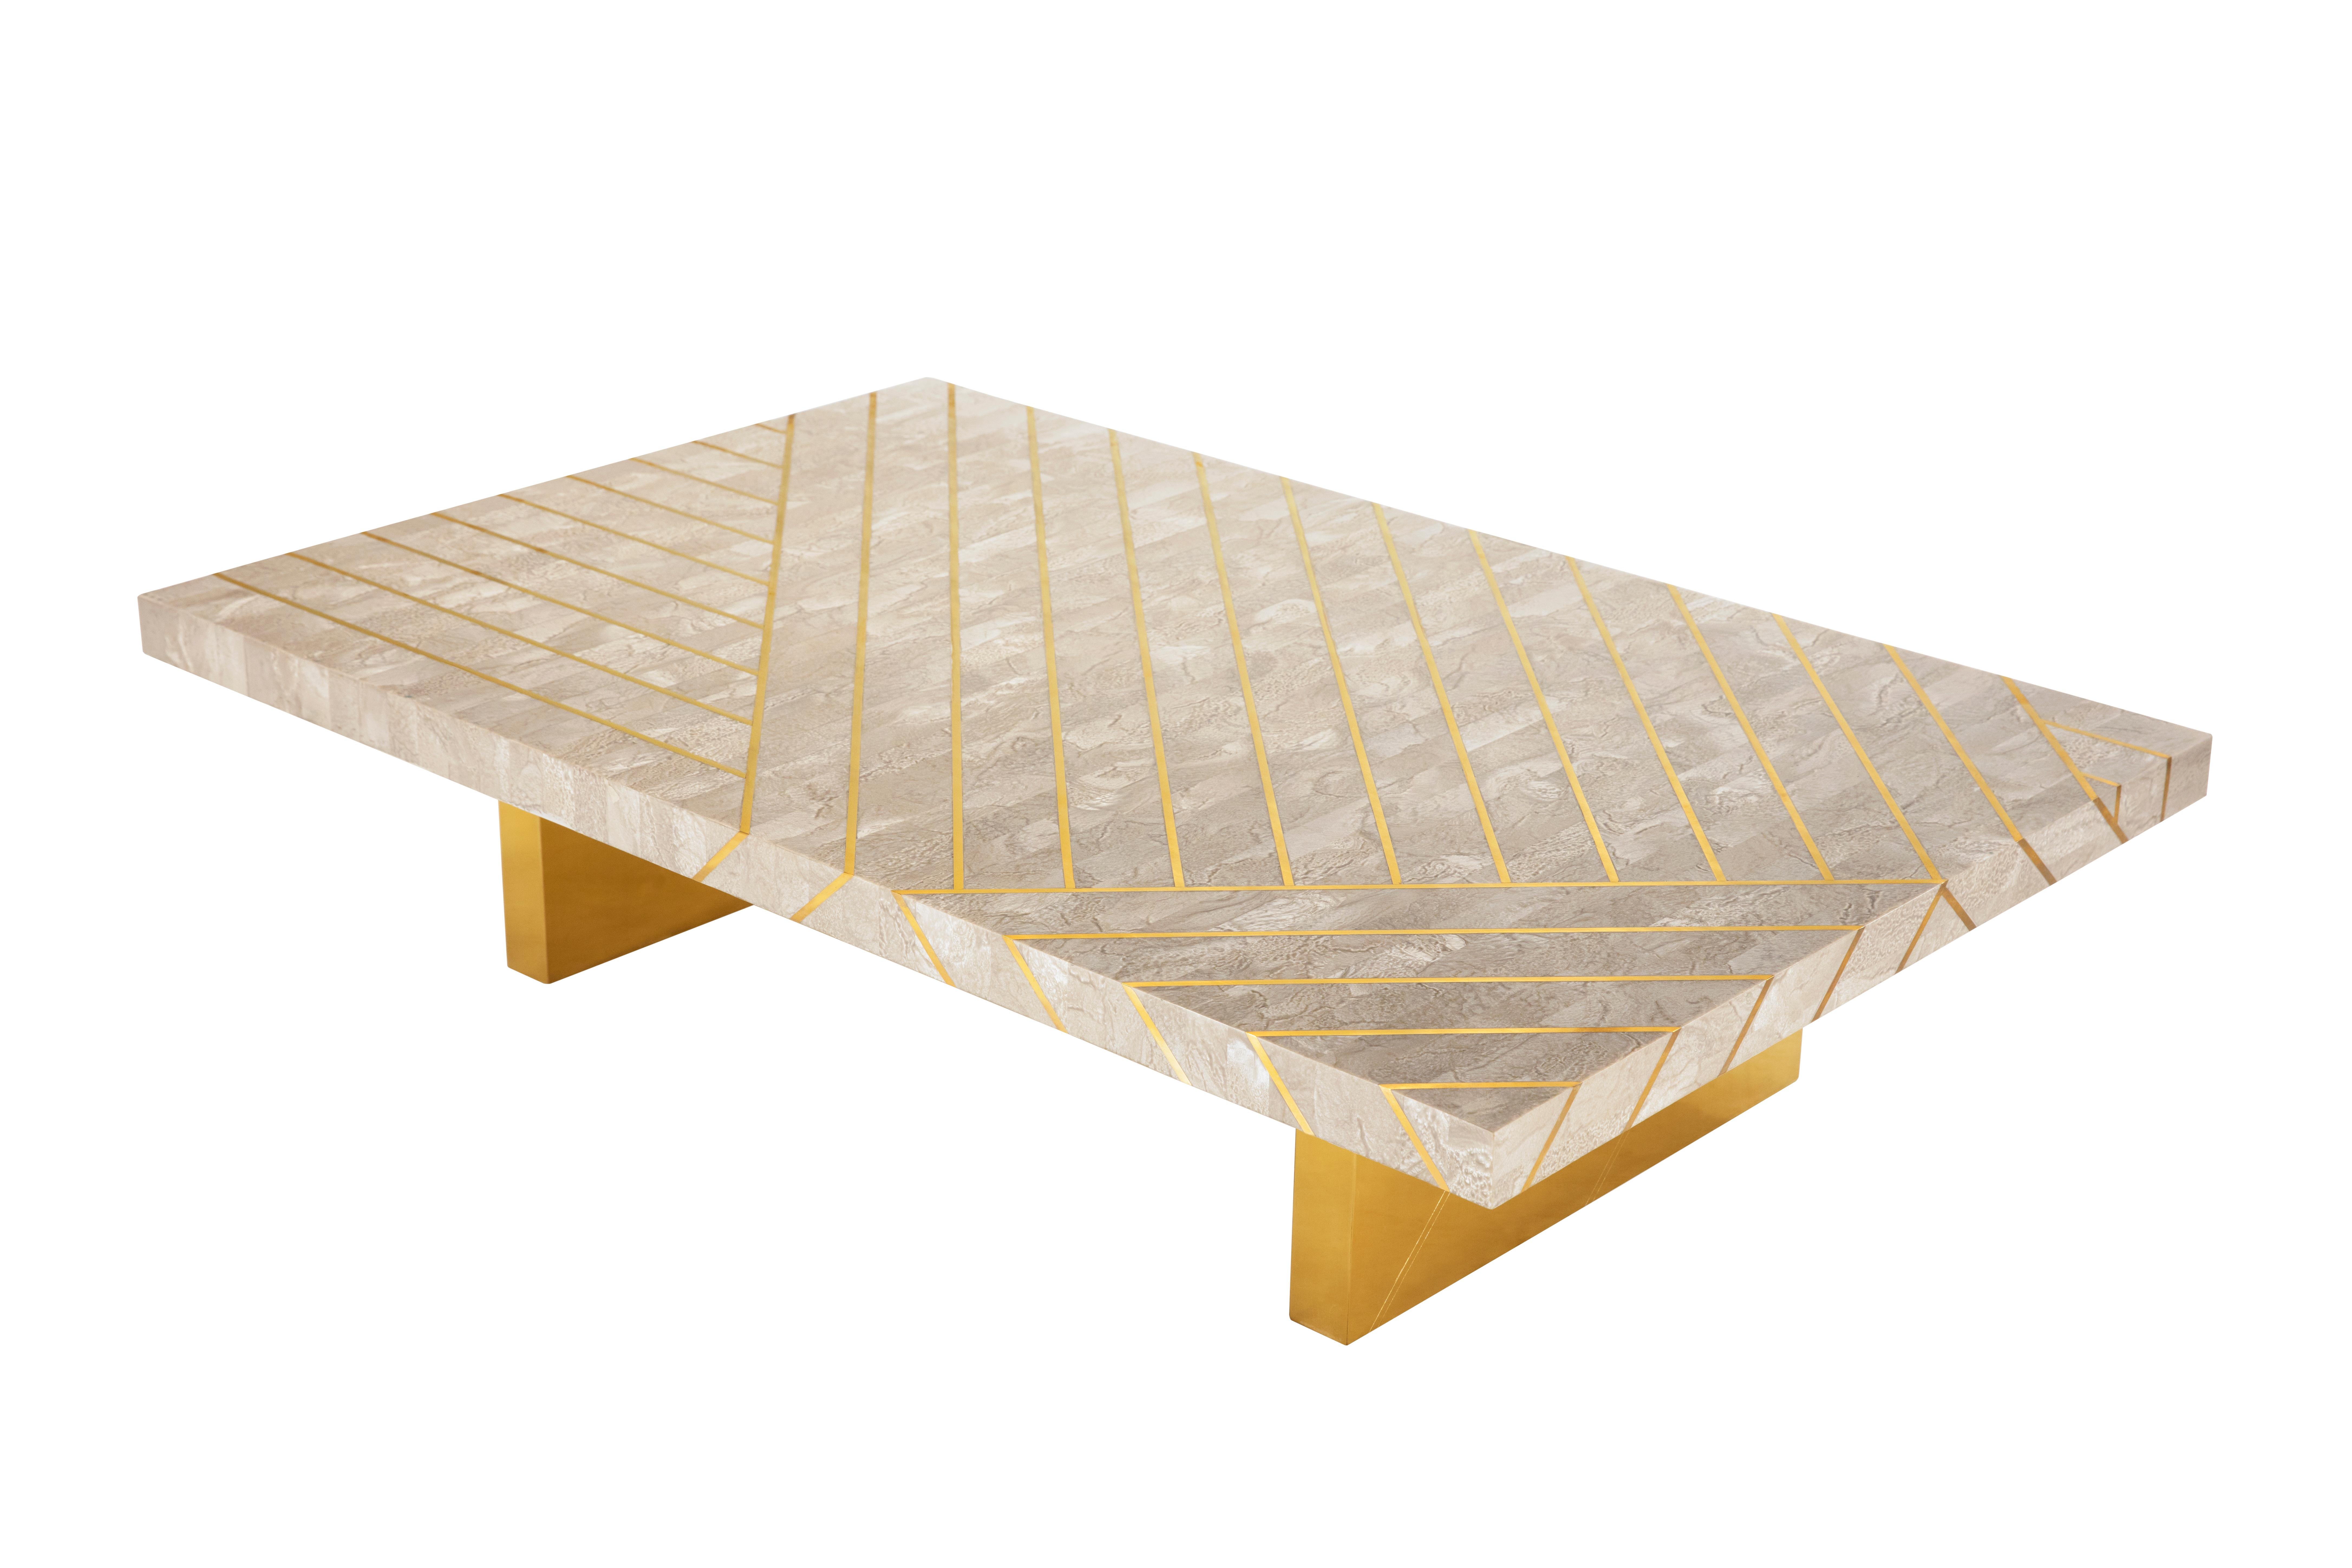 Nesso Beige and Pink Small Coffee Table with Brass Inlay by Matteo Cibic is a gorgeous coffee table in pearly resin and geometric brass inlay. Custom sizes are available on request. It comes in three colors - Beige, gray and Mint.

Awarded designer